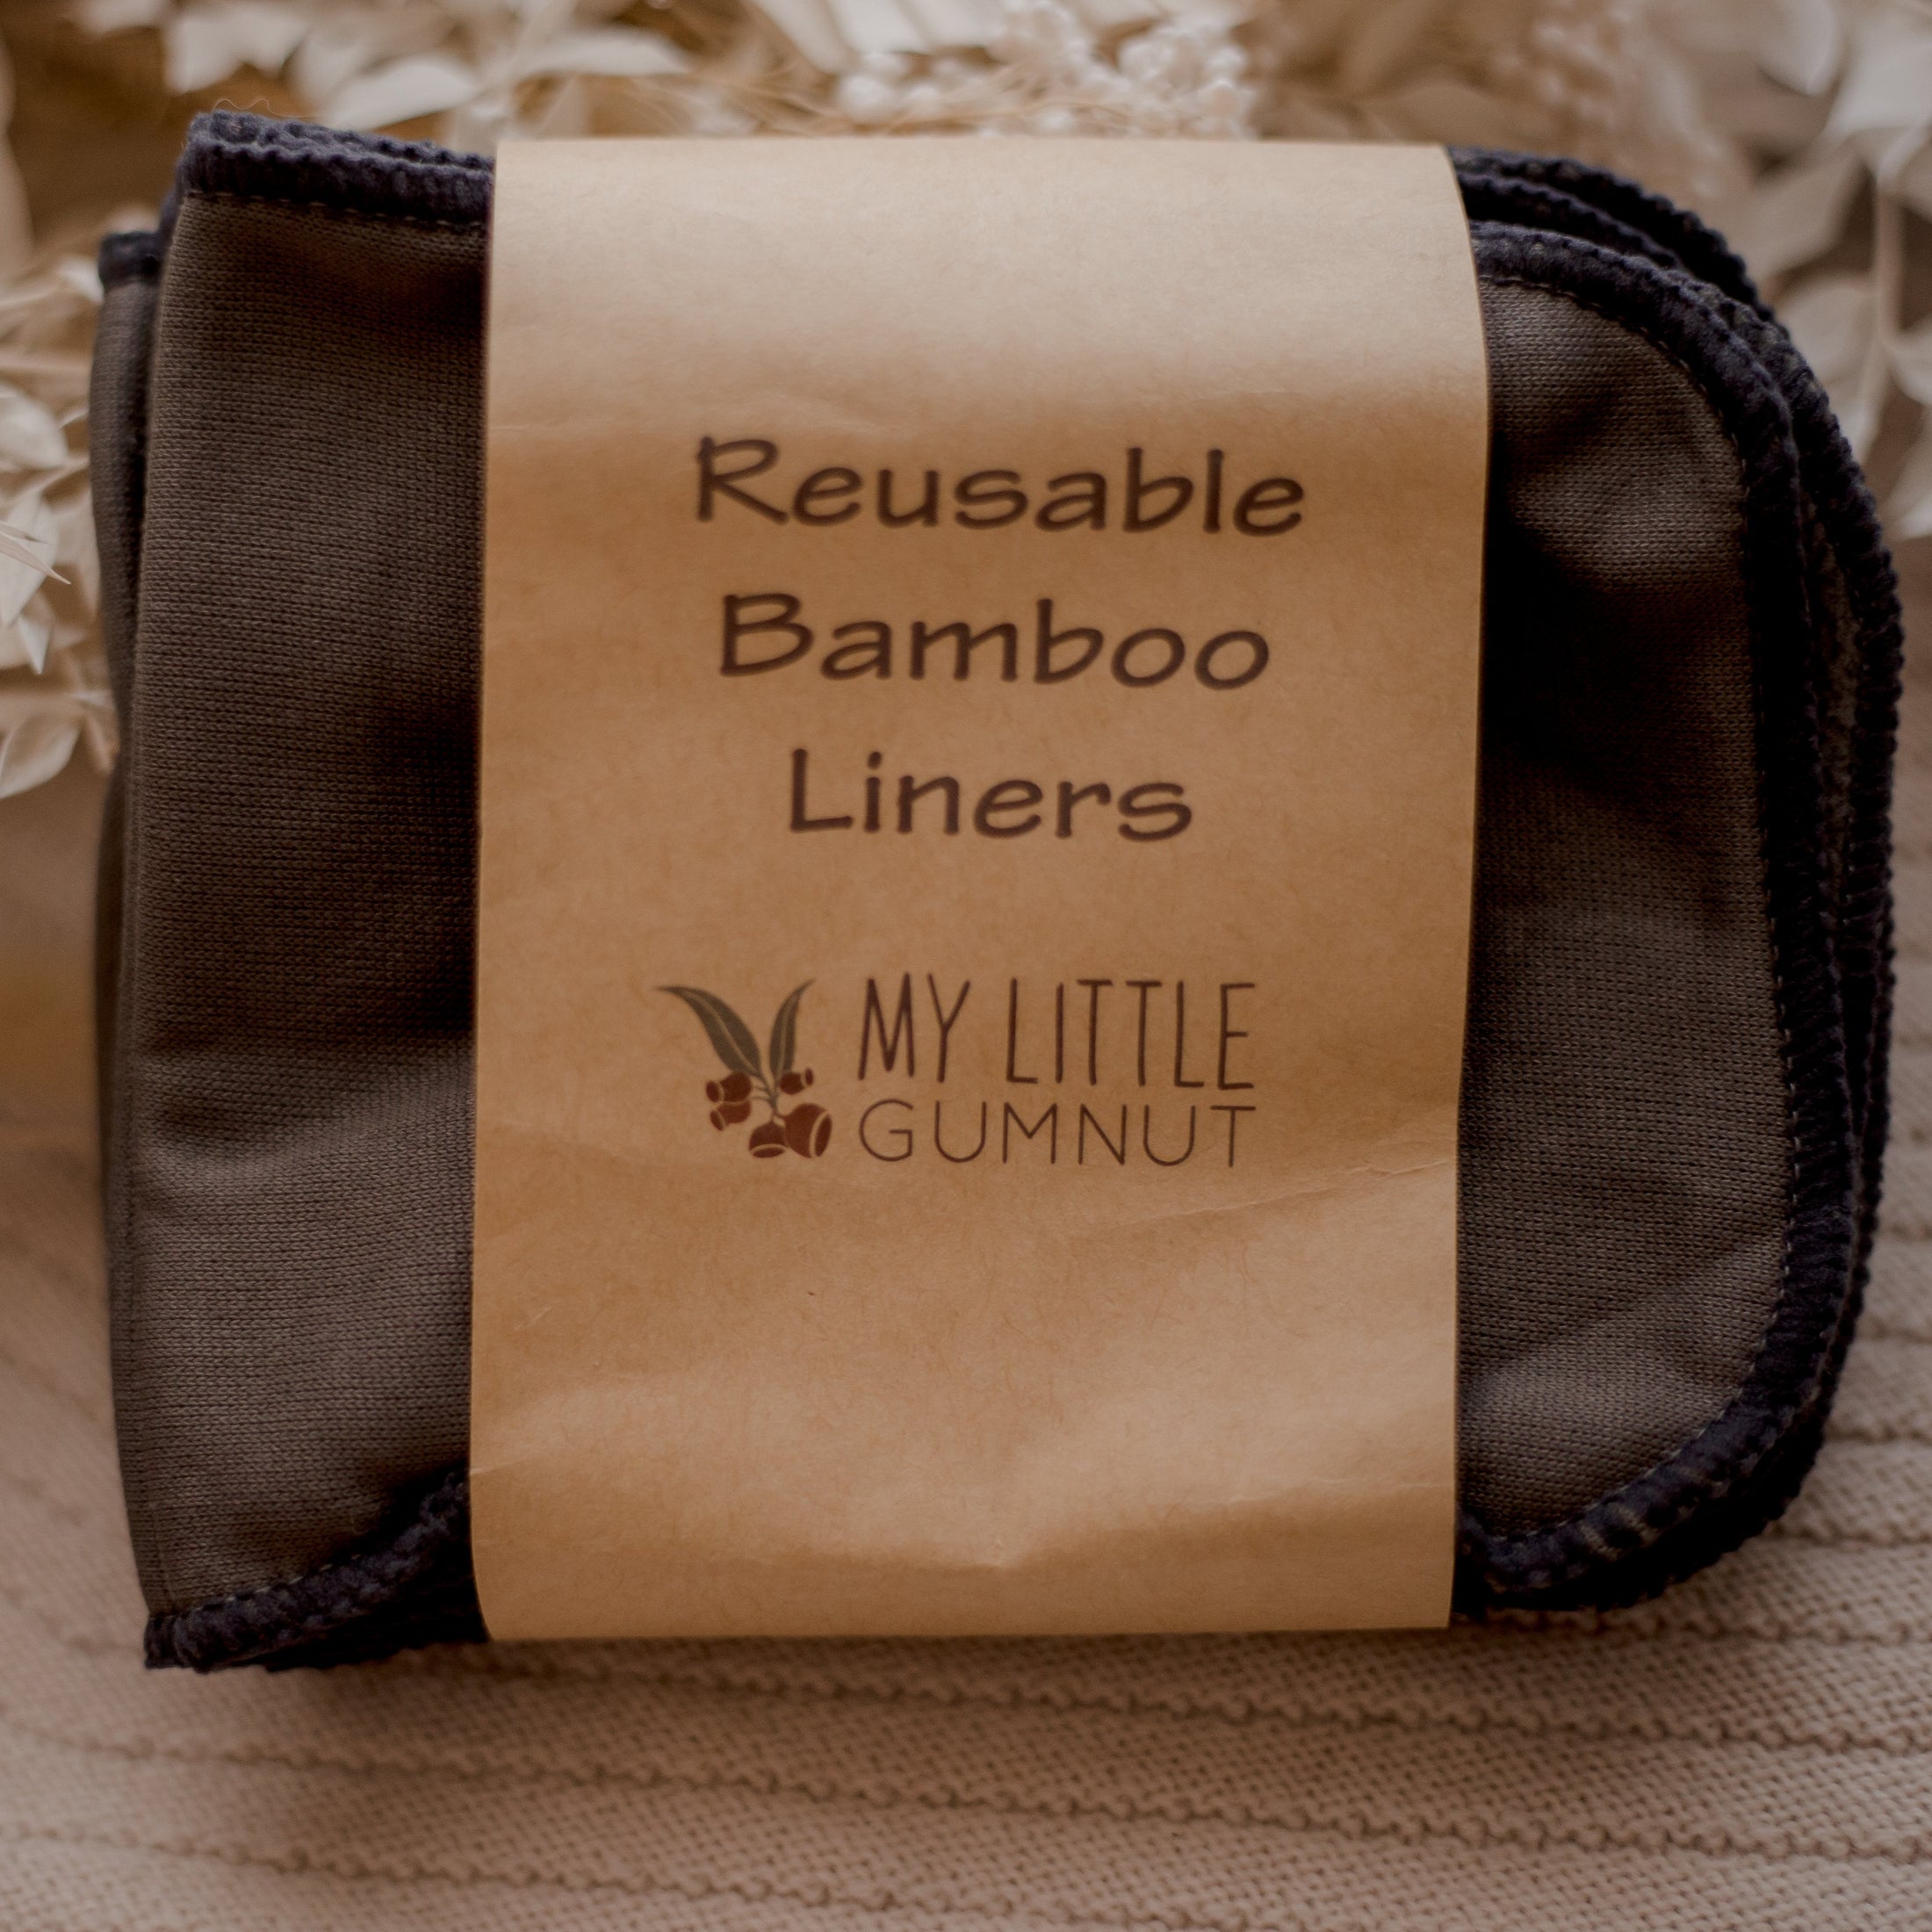 Reusable bamboo liners for cloth nappies. Cloth nappies by my little gumnut australia. 